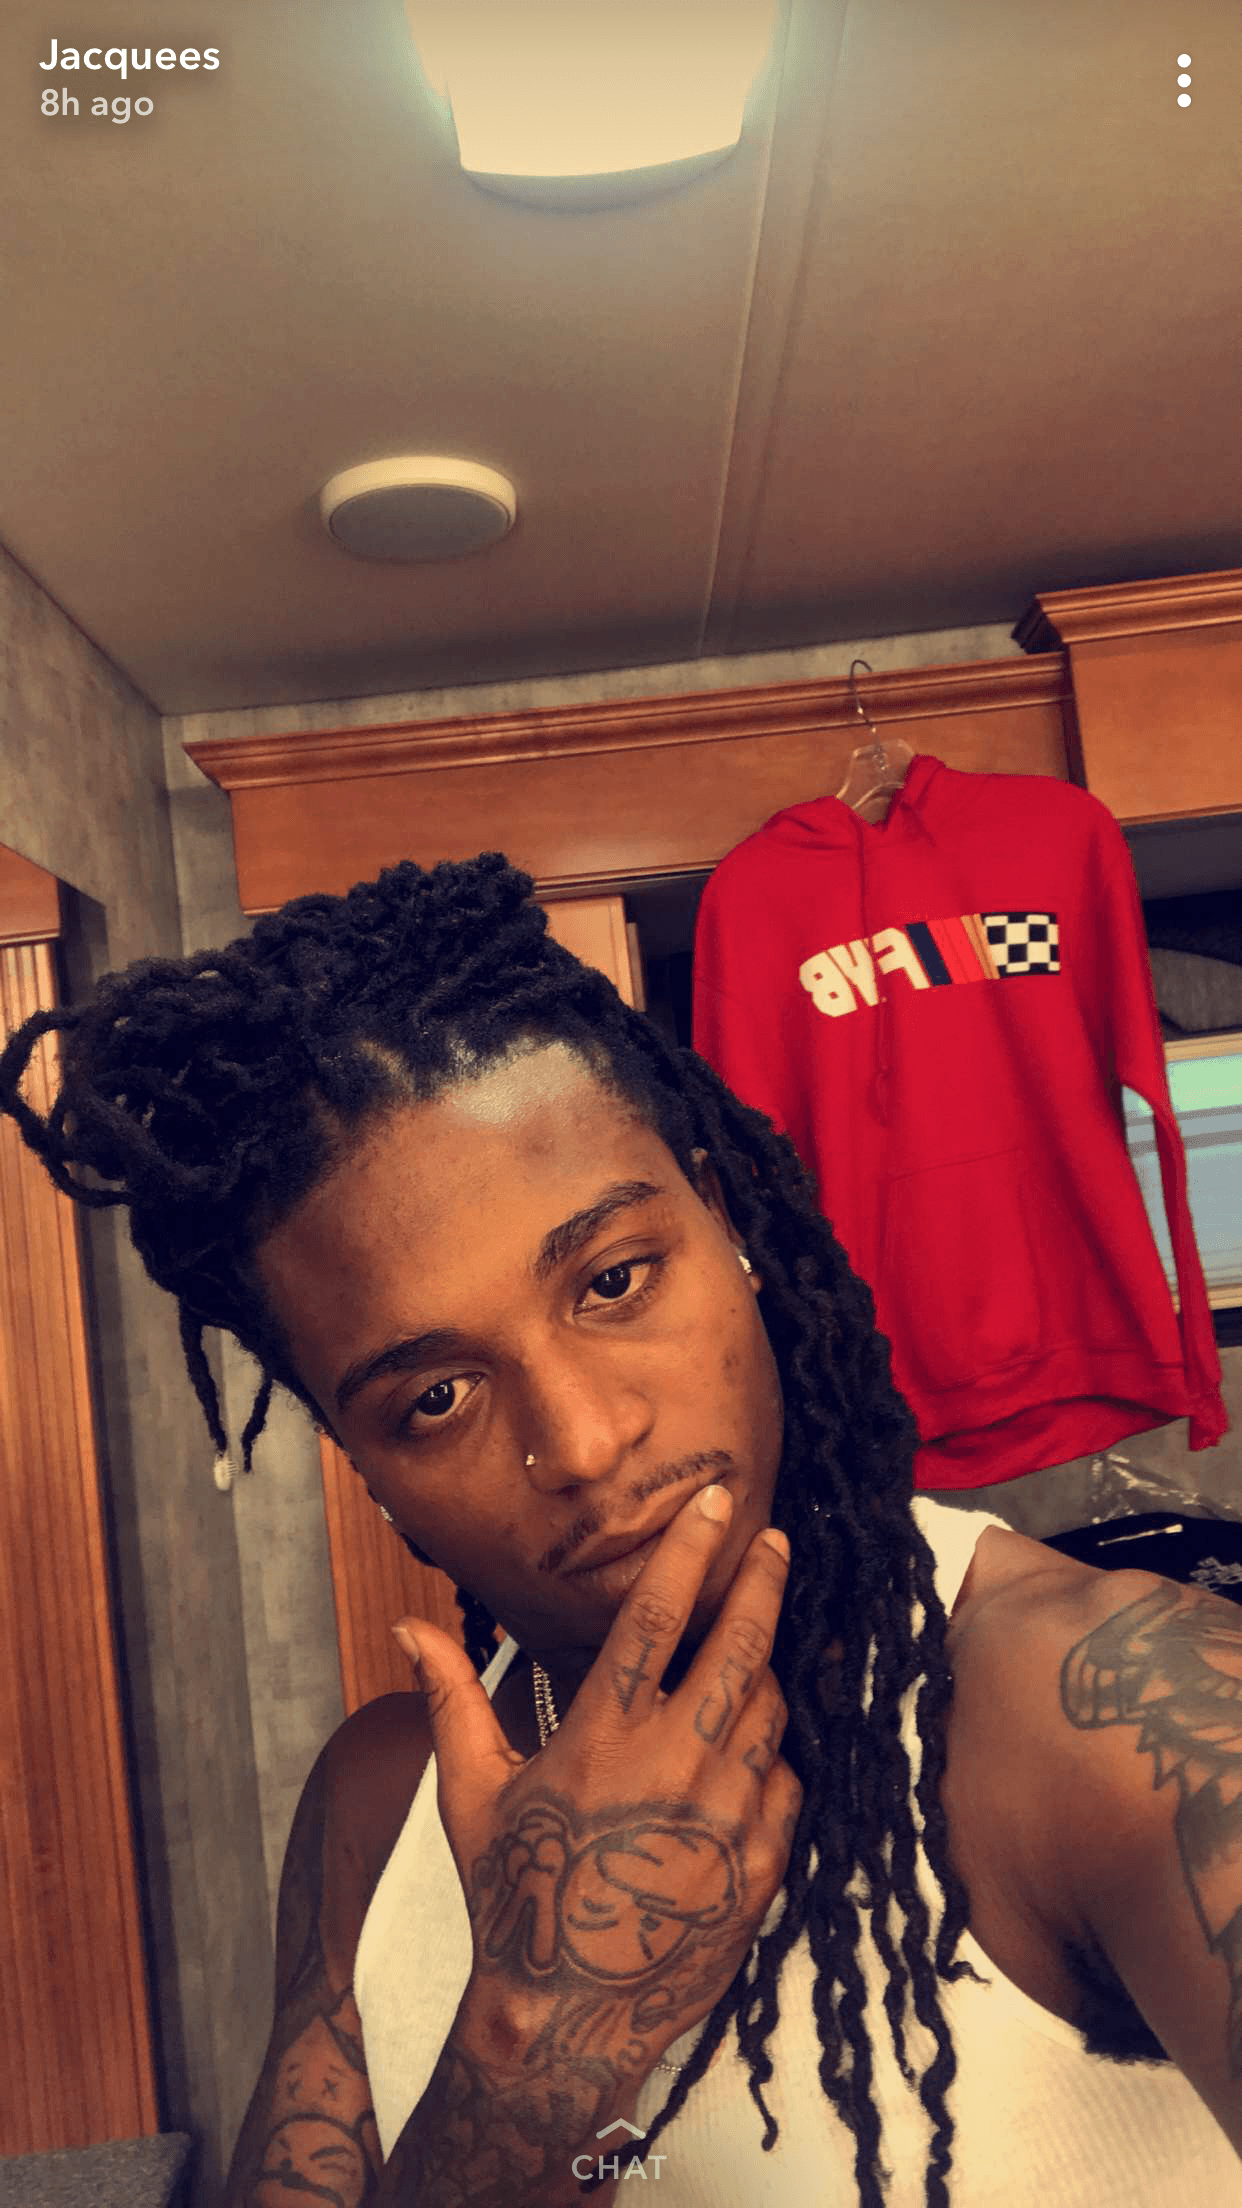 Jacquees. Long dreads, Man crush everyday